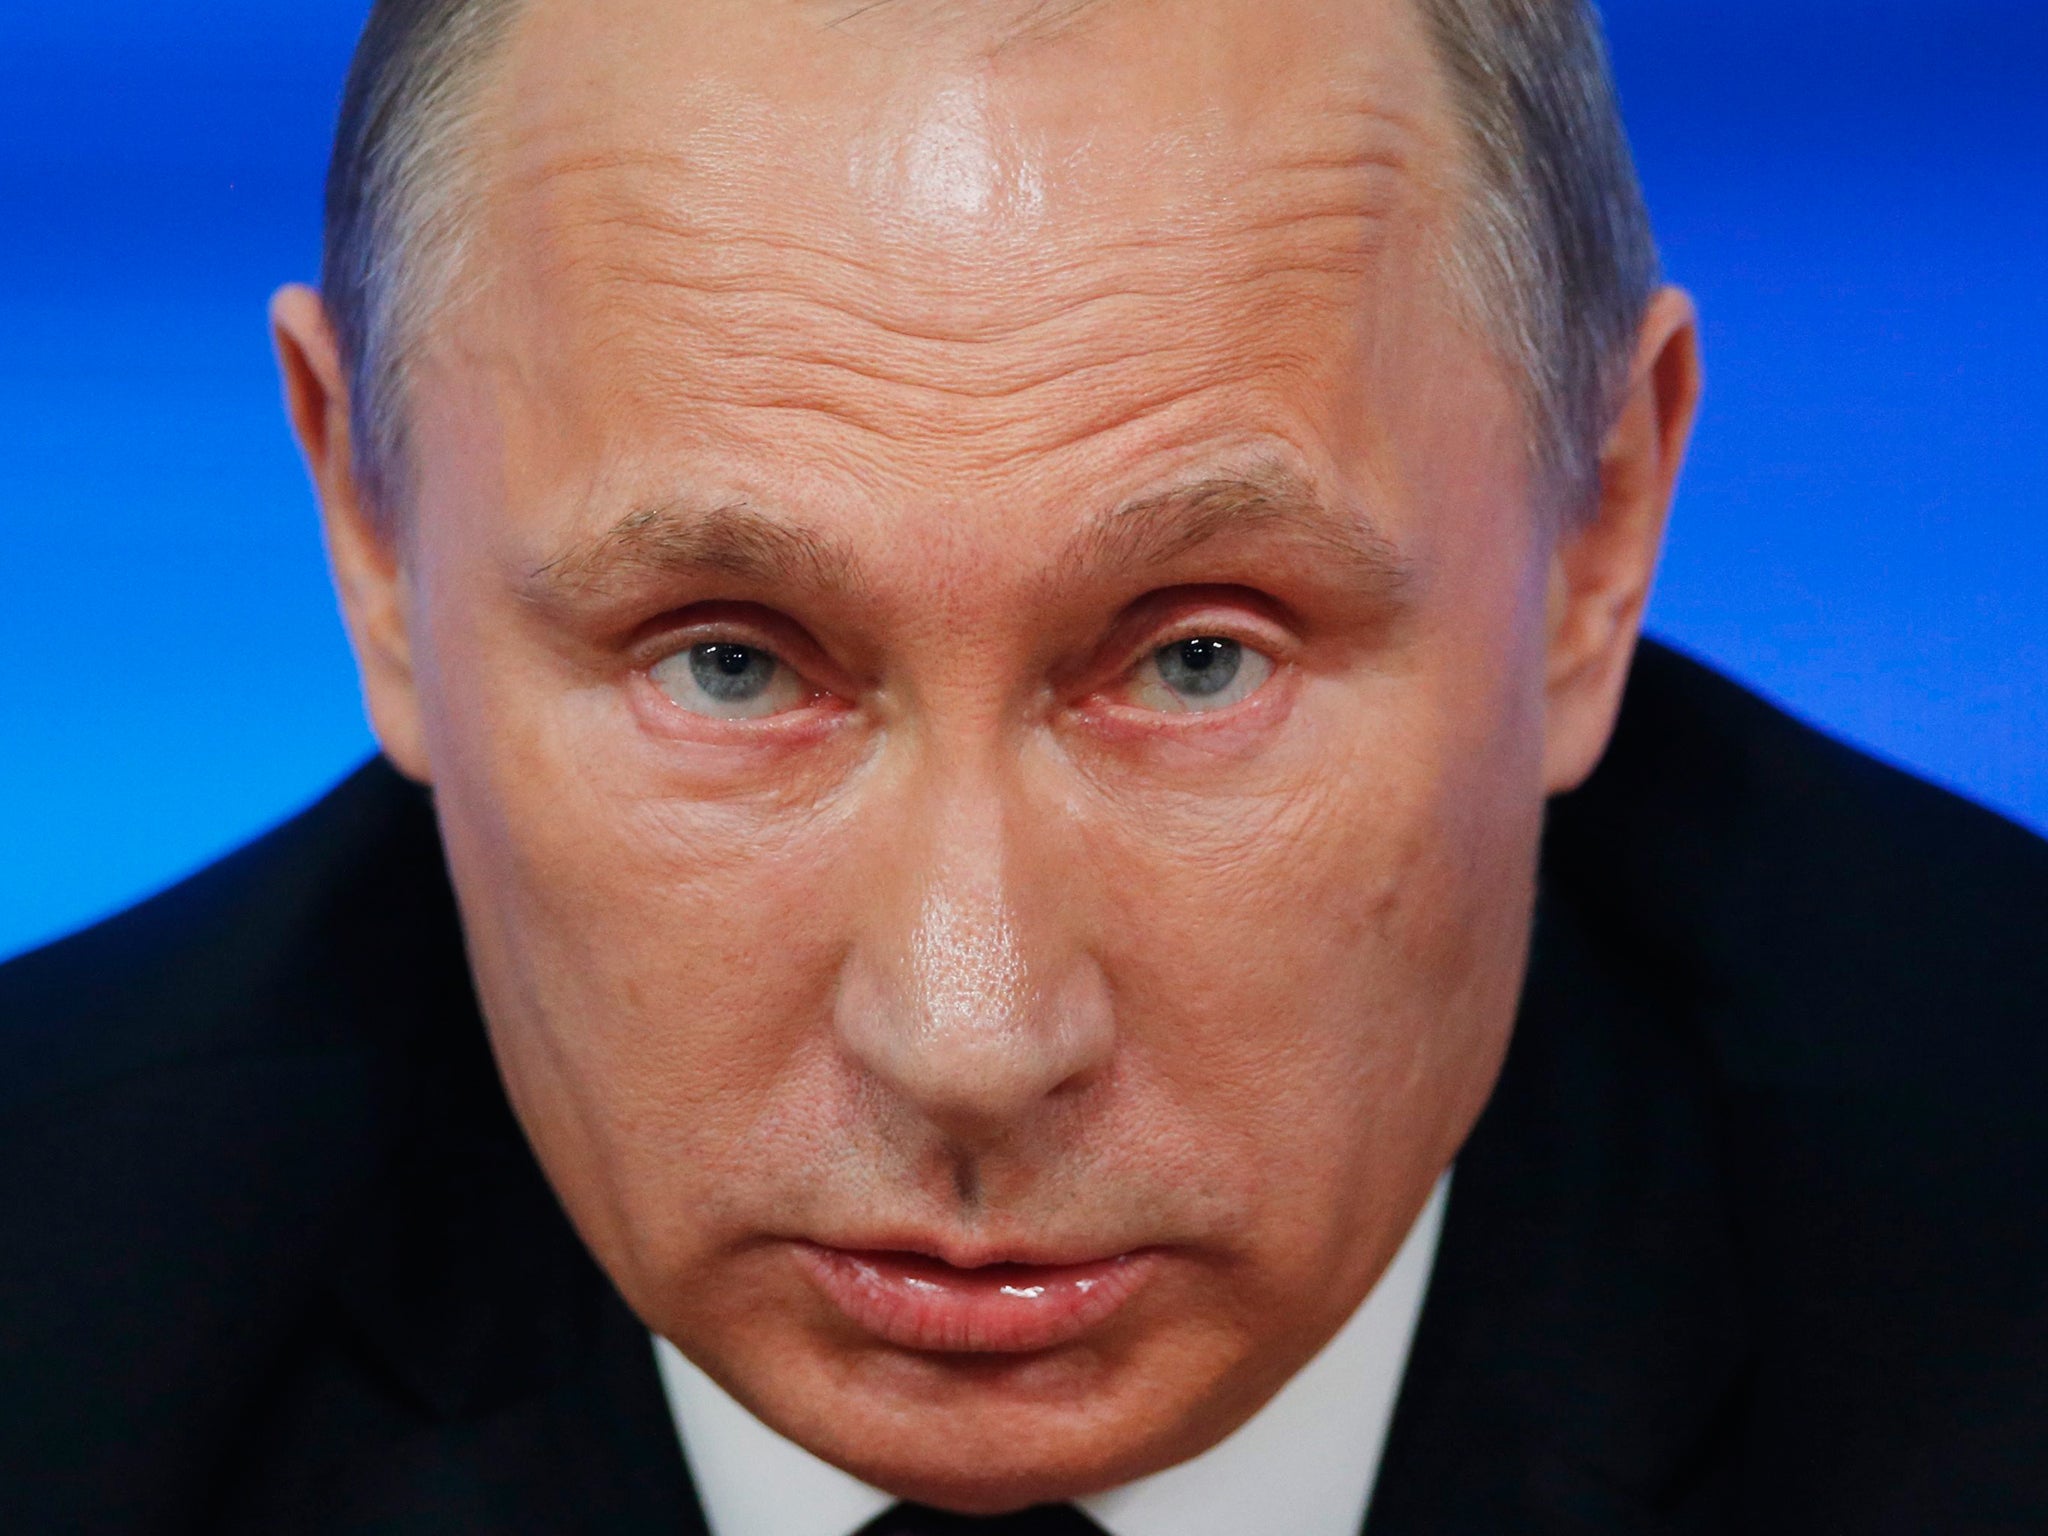 Putin has spoken candidly of a secret meeting in which the decision to 'return Crimea to Russia' was made